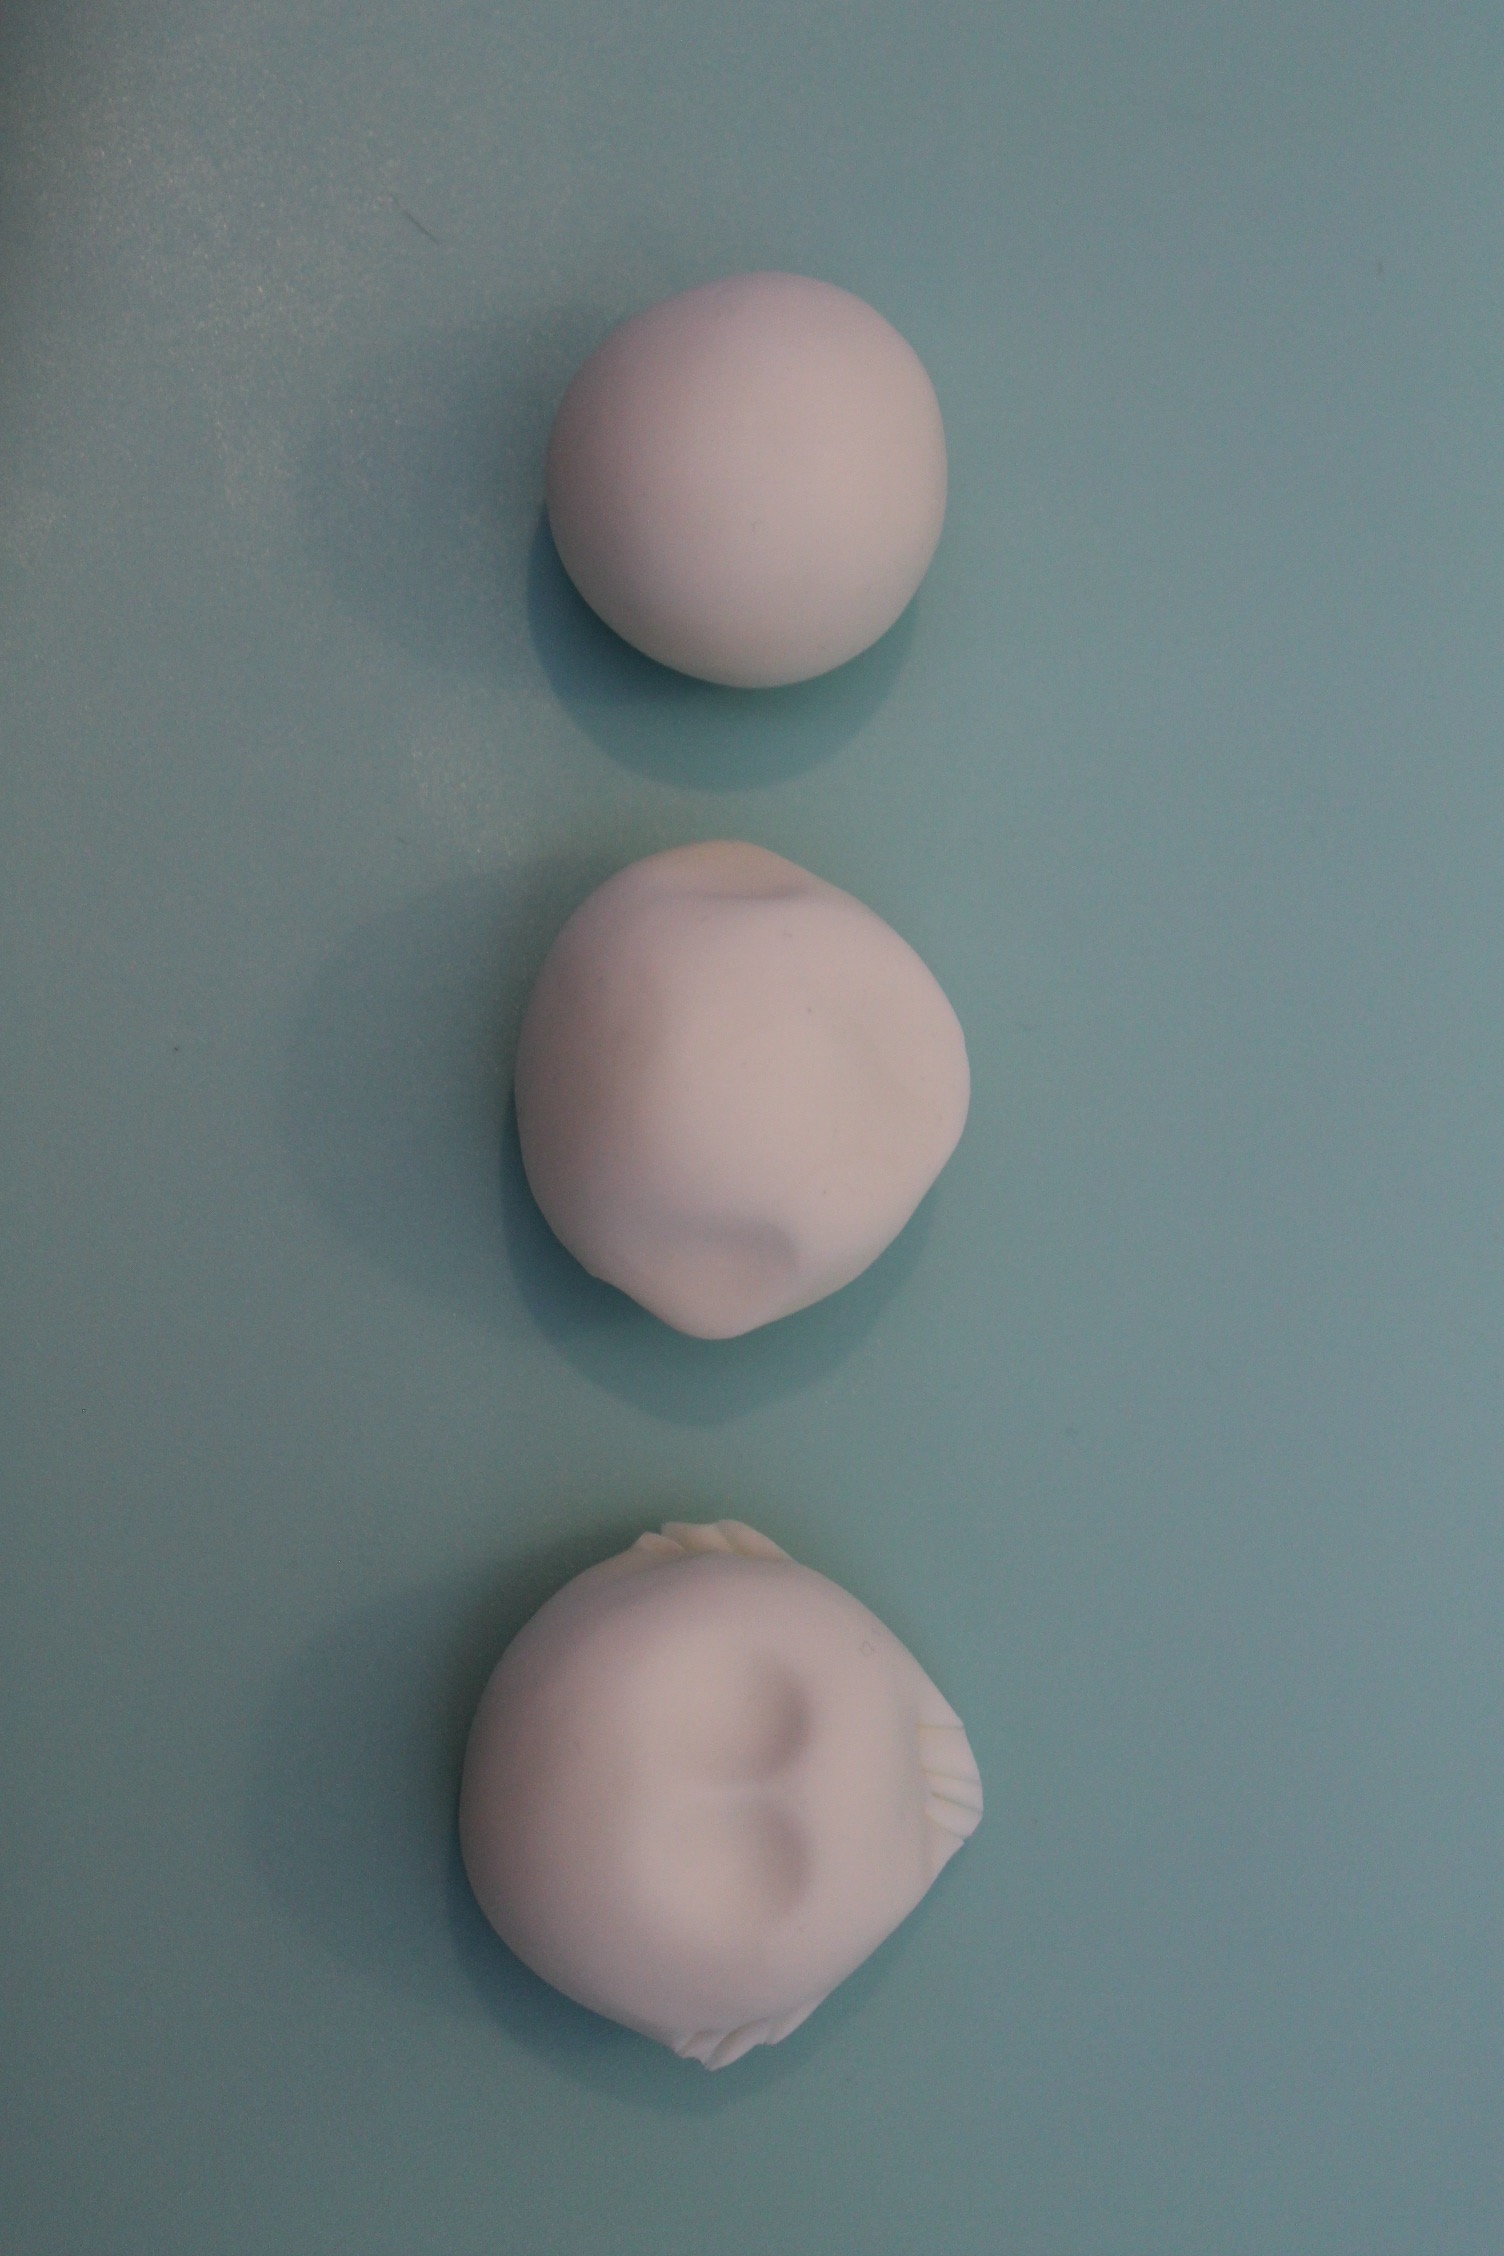 For the head, make a round ball of modelling paste, approximately a fifth of the body size. Pinch either side for the top of the furry jaw line and push your thumbs in at the centre slightly to create eye sockets. Use a dresden tool to draw lines at the very edge of each side of the face to create a fur effect.